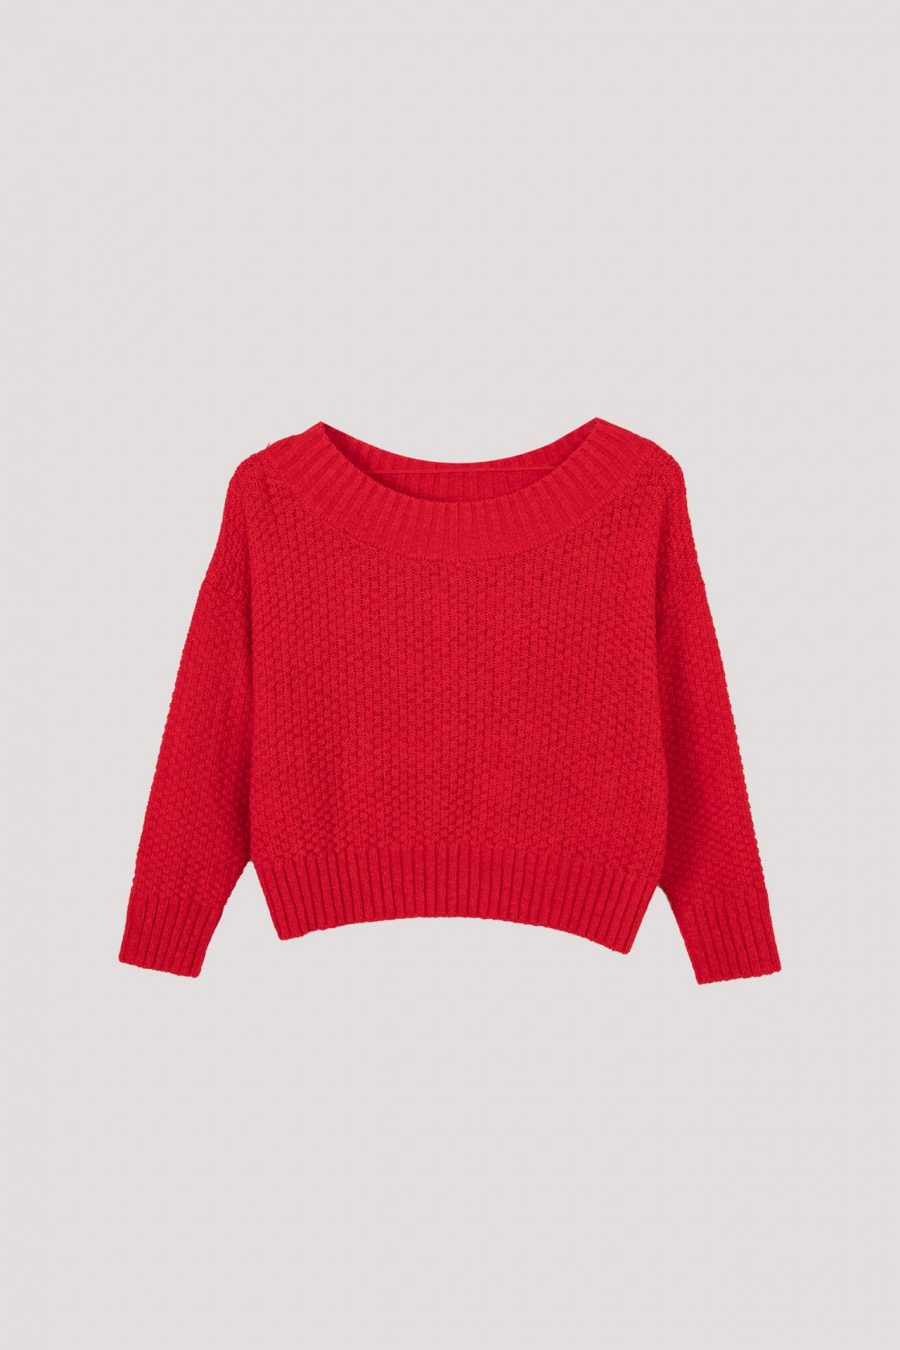 CKL000068S KNITTED TEXTURED WEAVE TOP RED